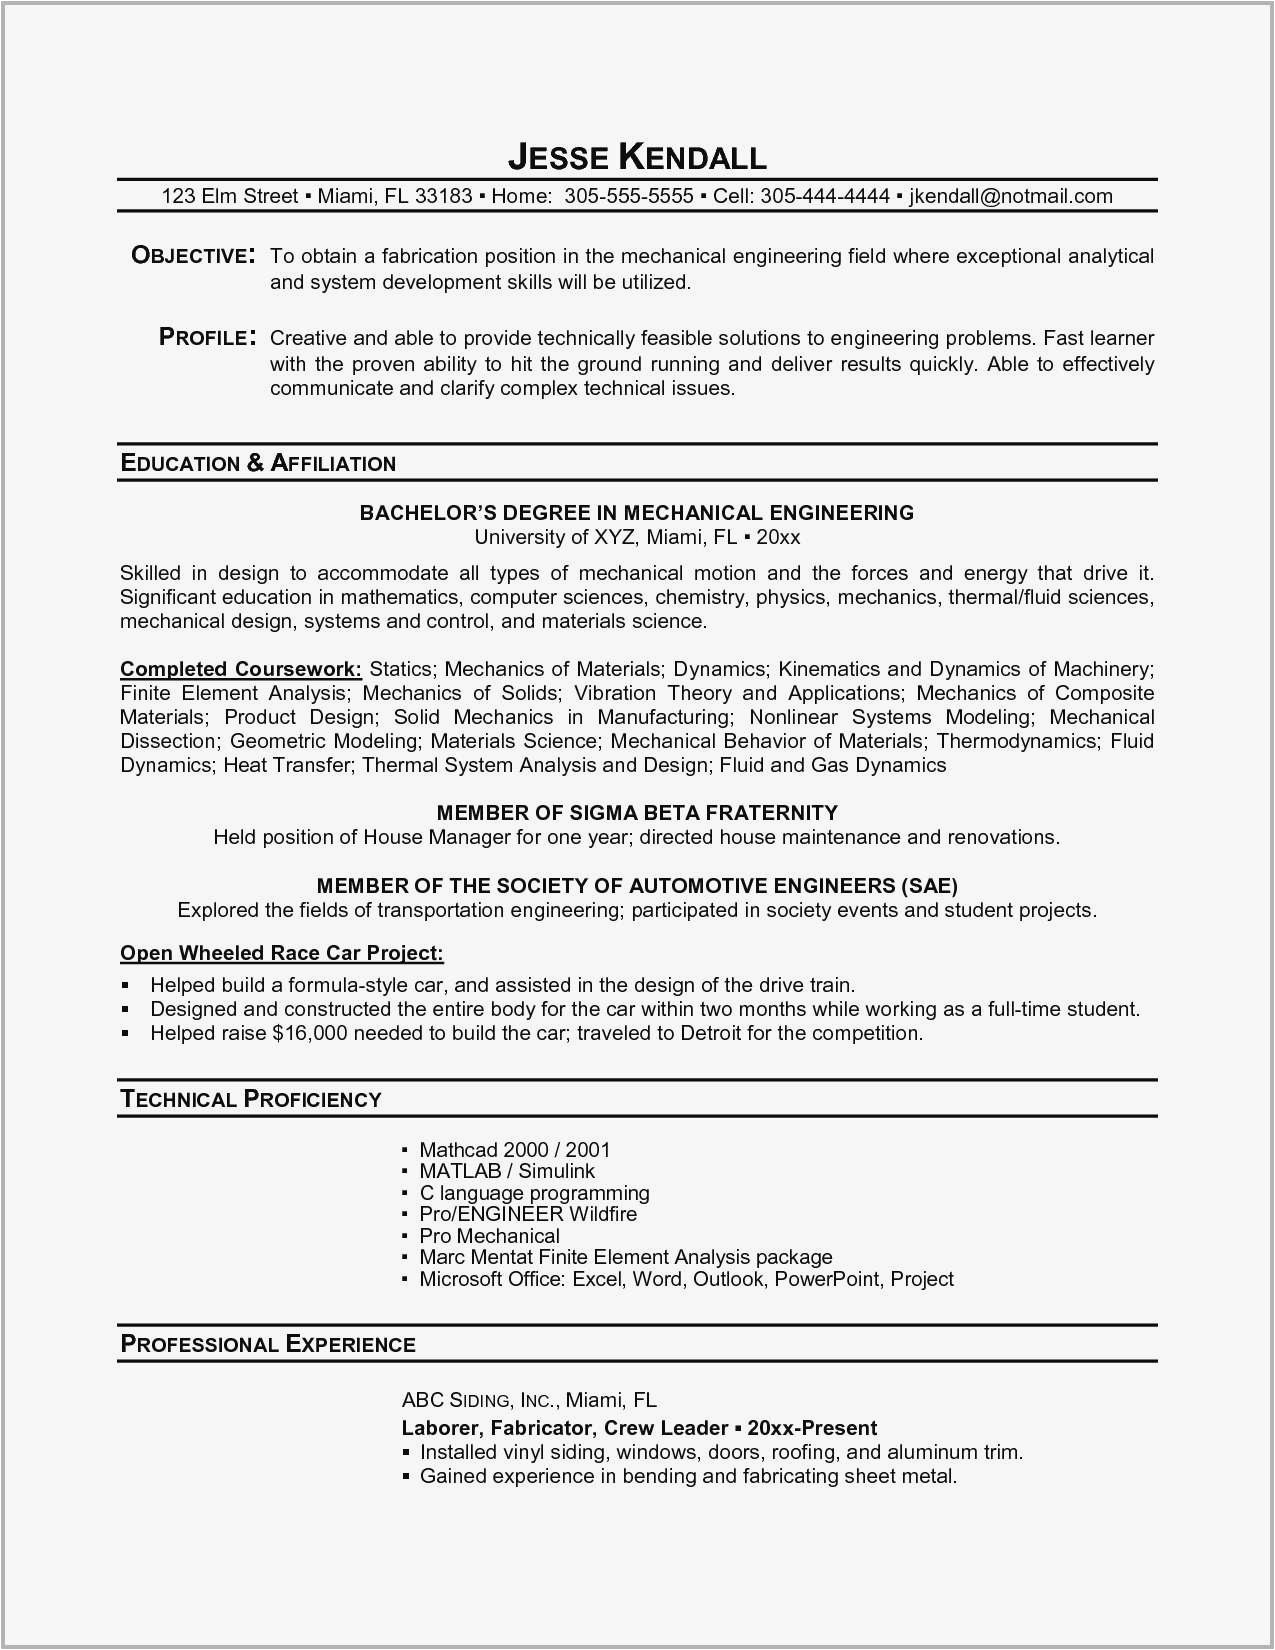 Sample Resume for Quality Engineer In Automobile 12 Automobile Engineer Resume Samples